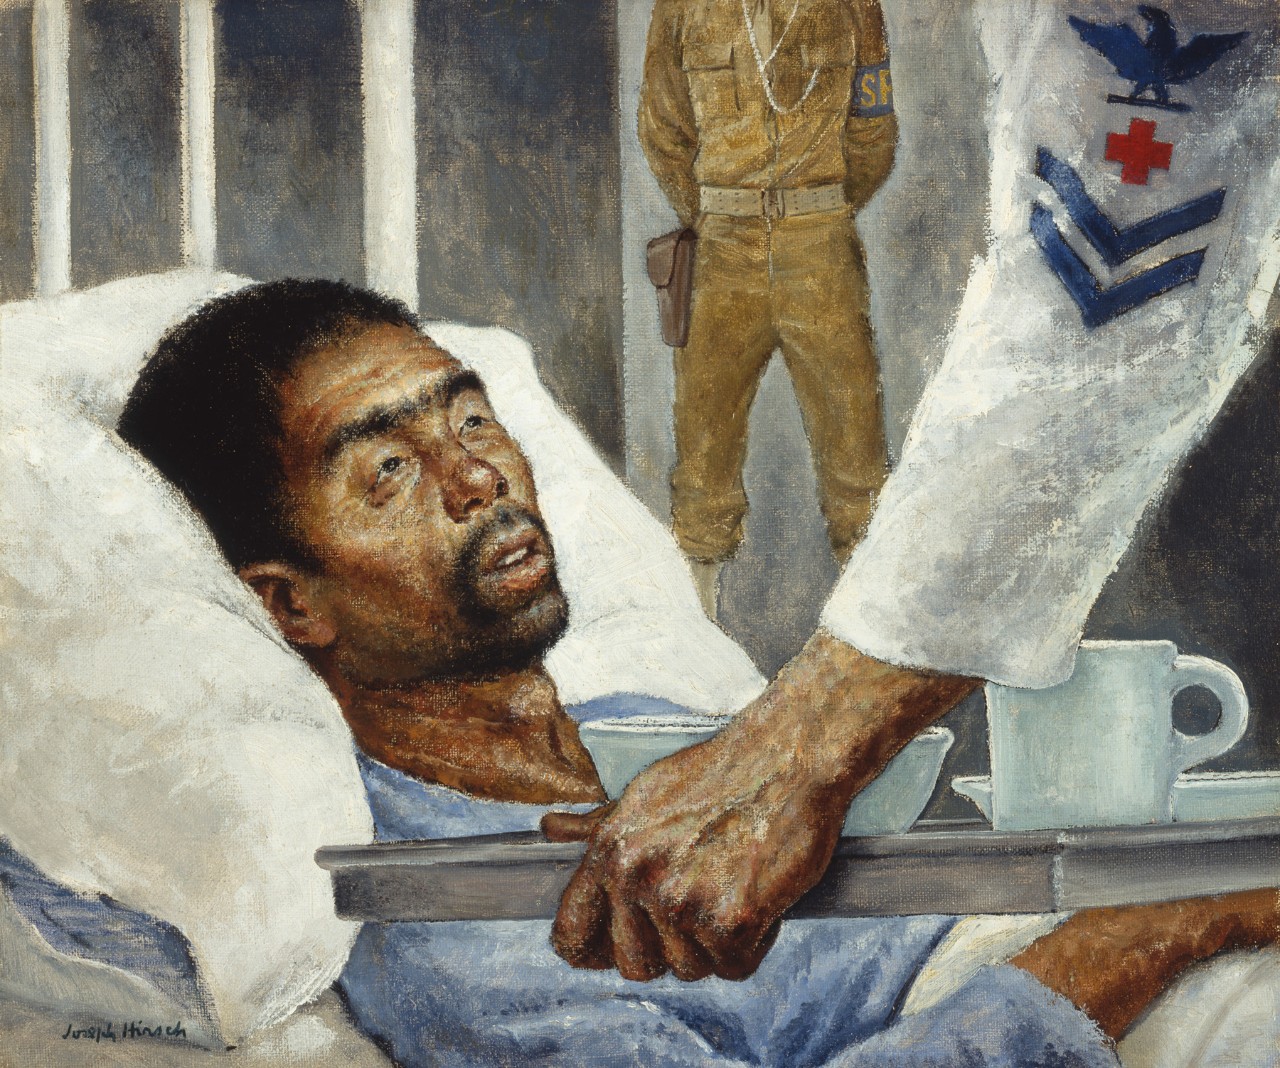 A corpsman bring a tray of food to a man in a hospital bed